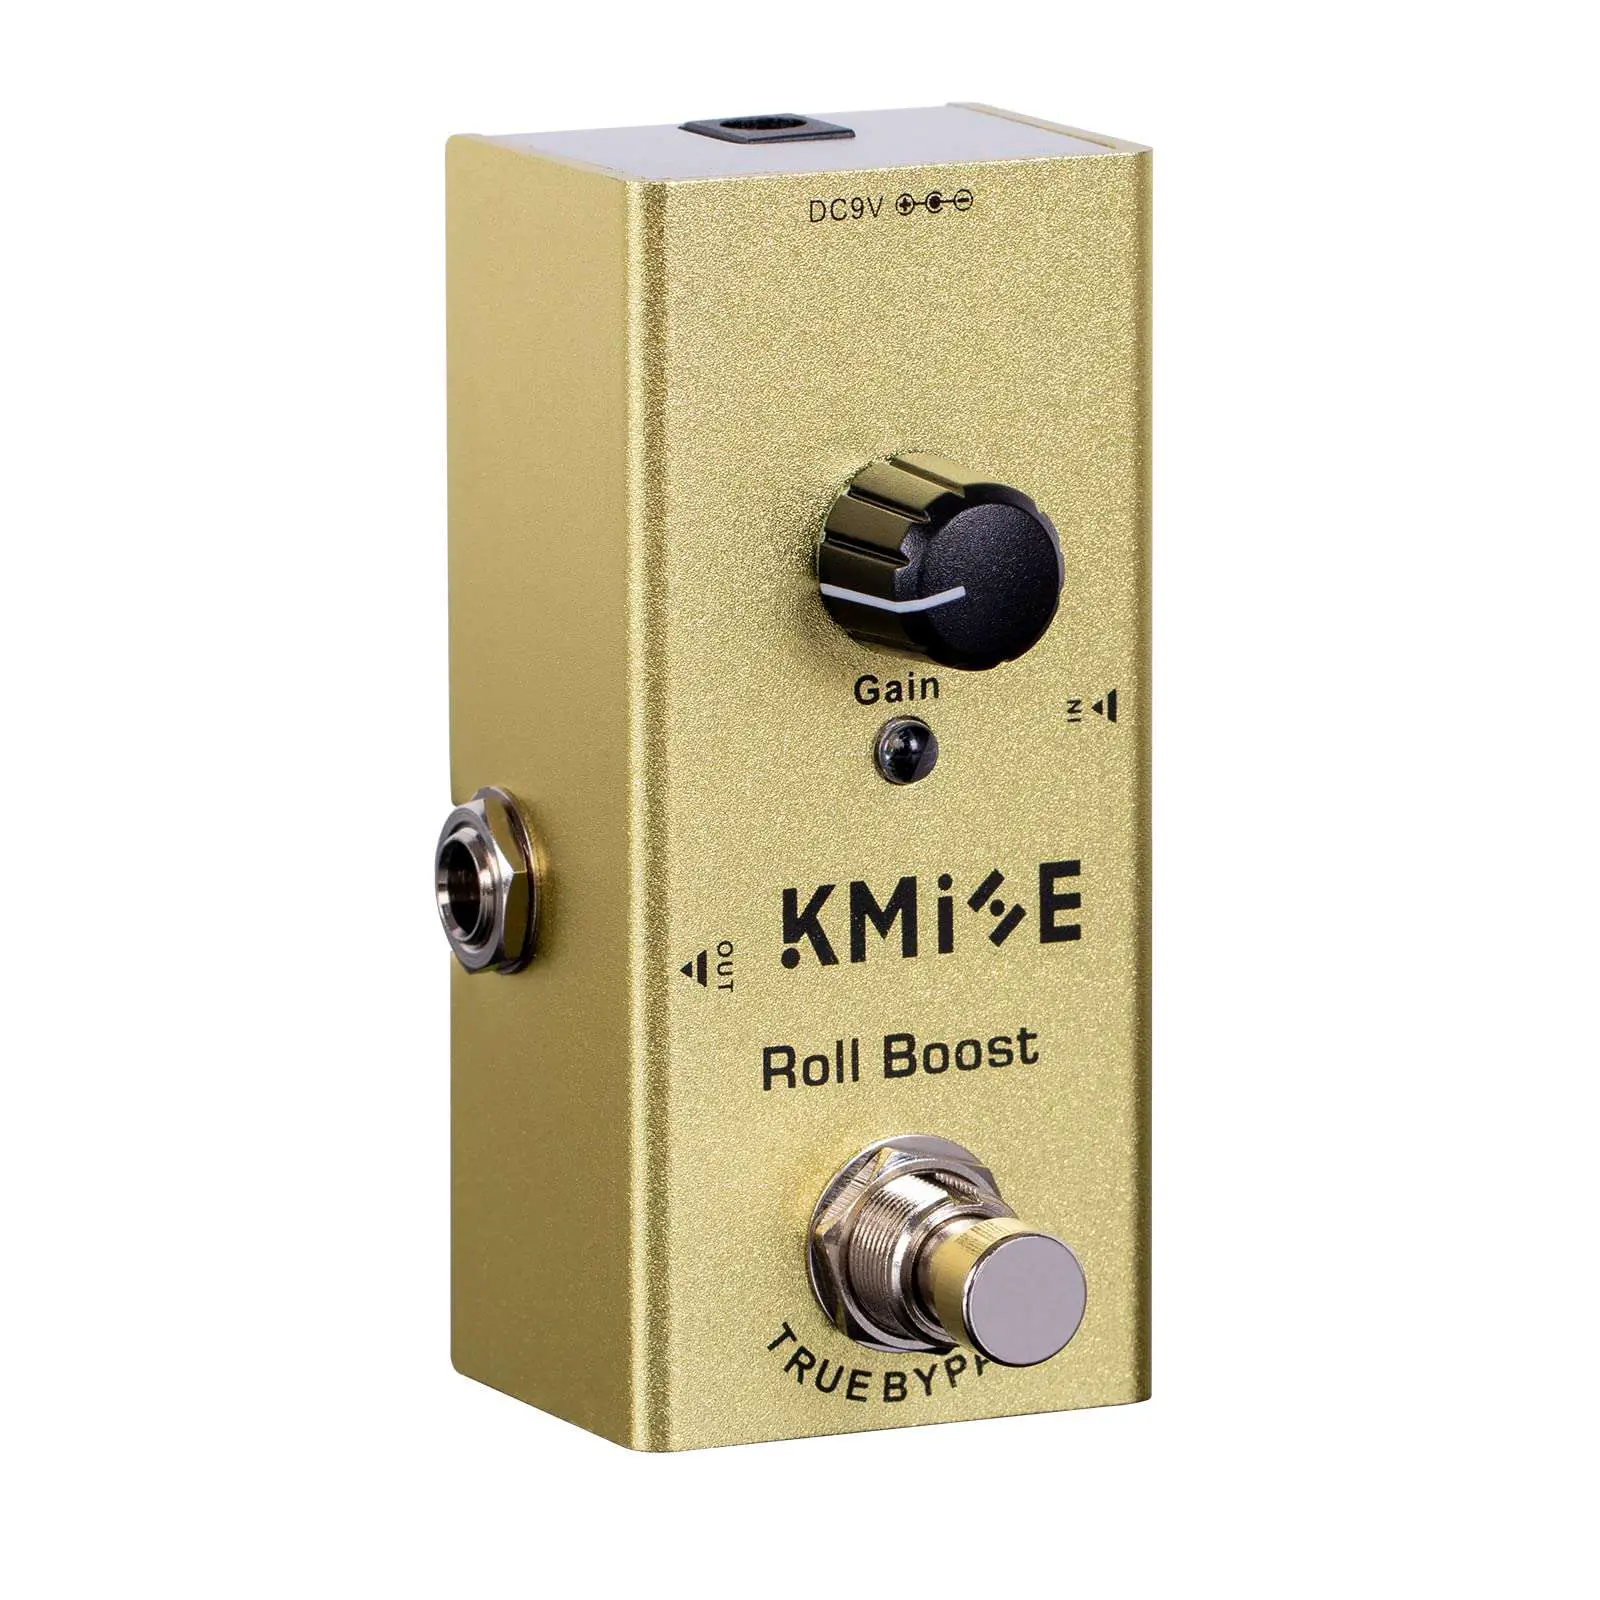 Kmise Roll Boost Pedal